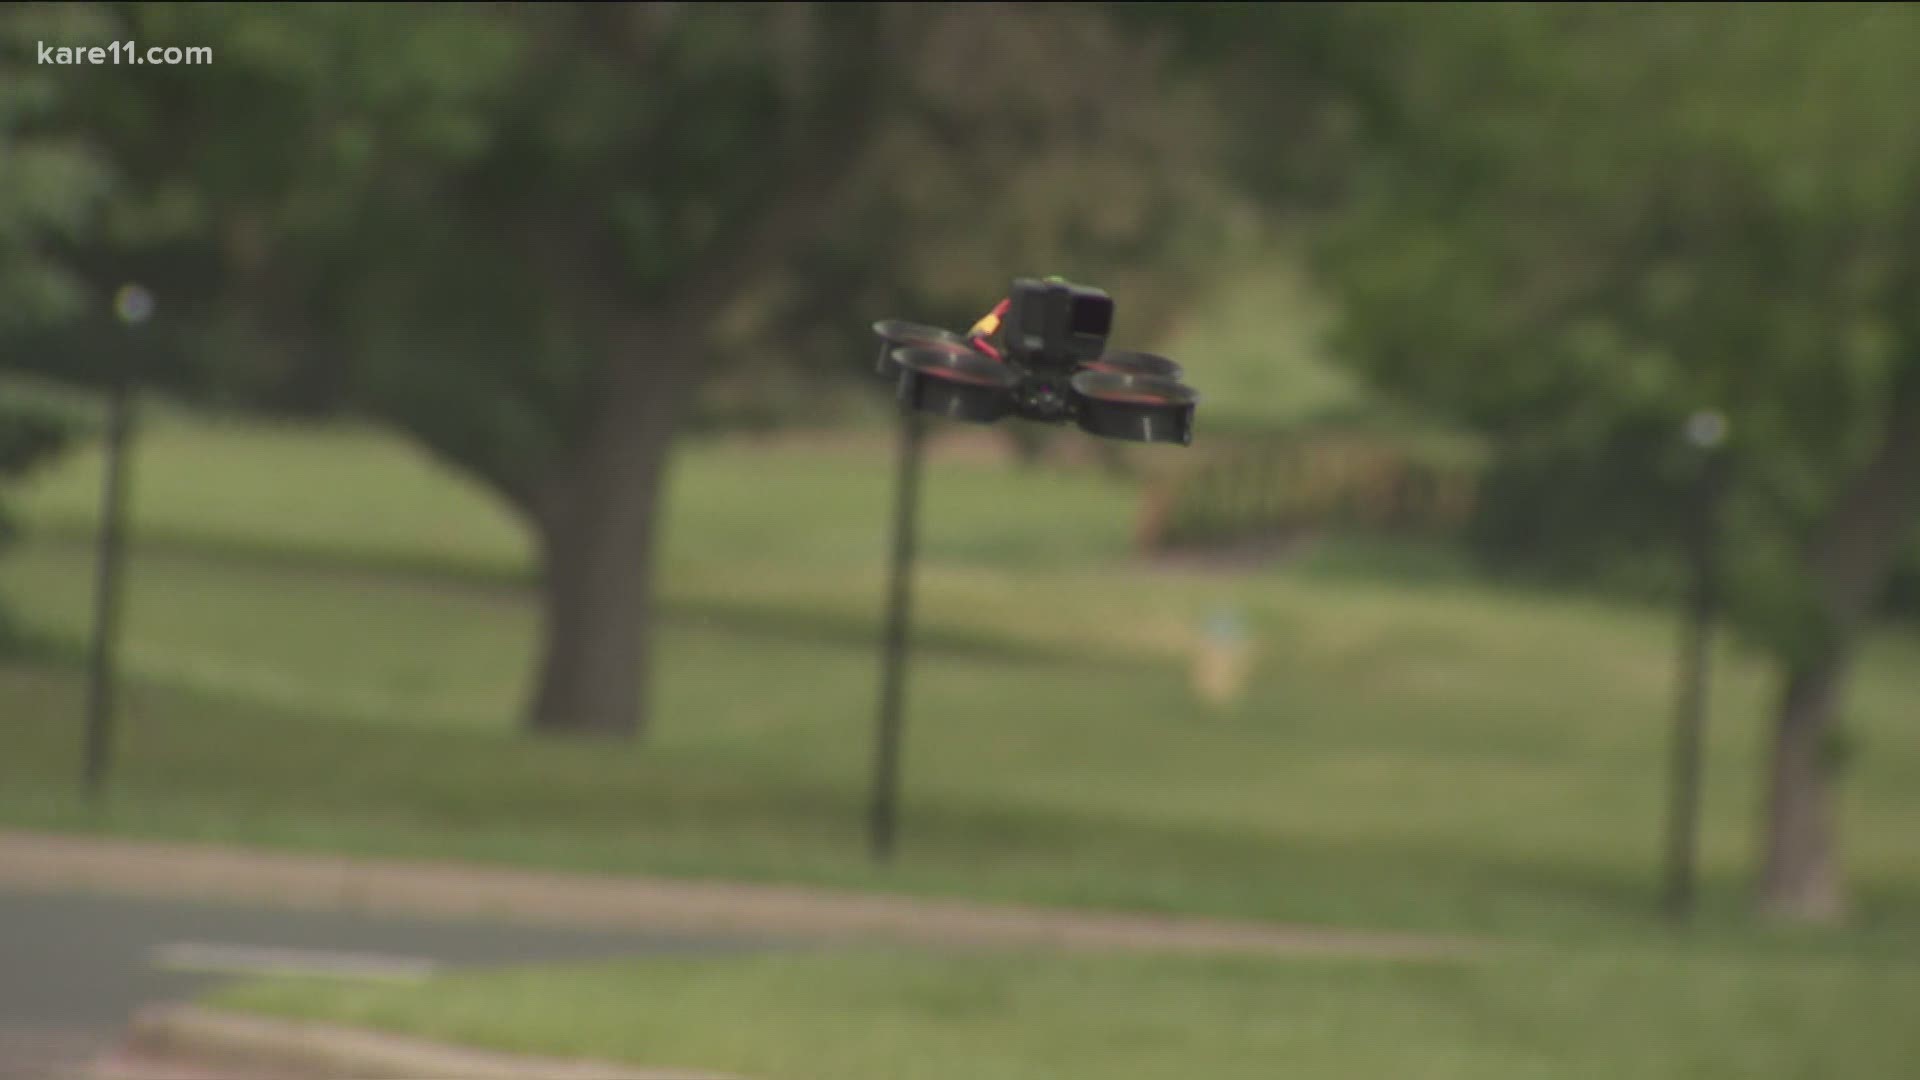 Starting Friday at RdyTechGo in the MOA, the best high school drone racers in the country will compete in the national championships